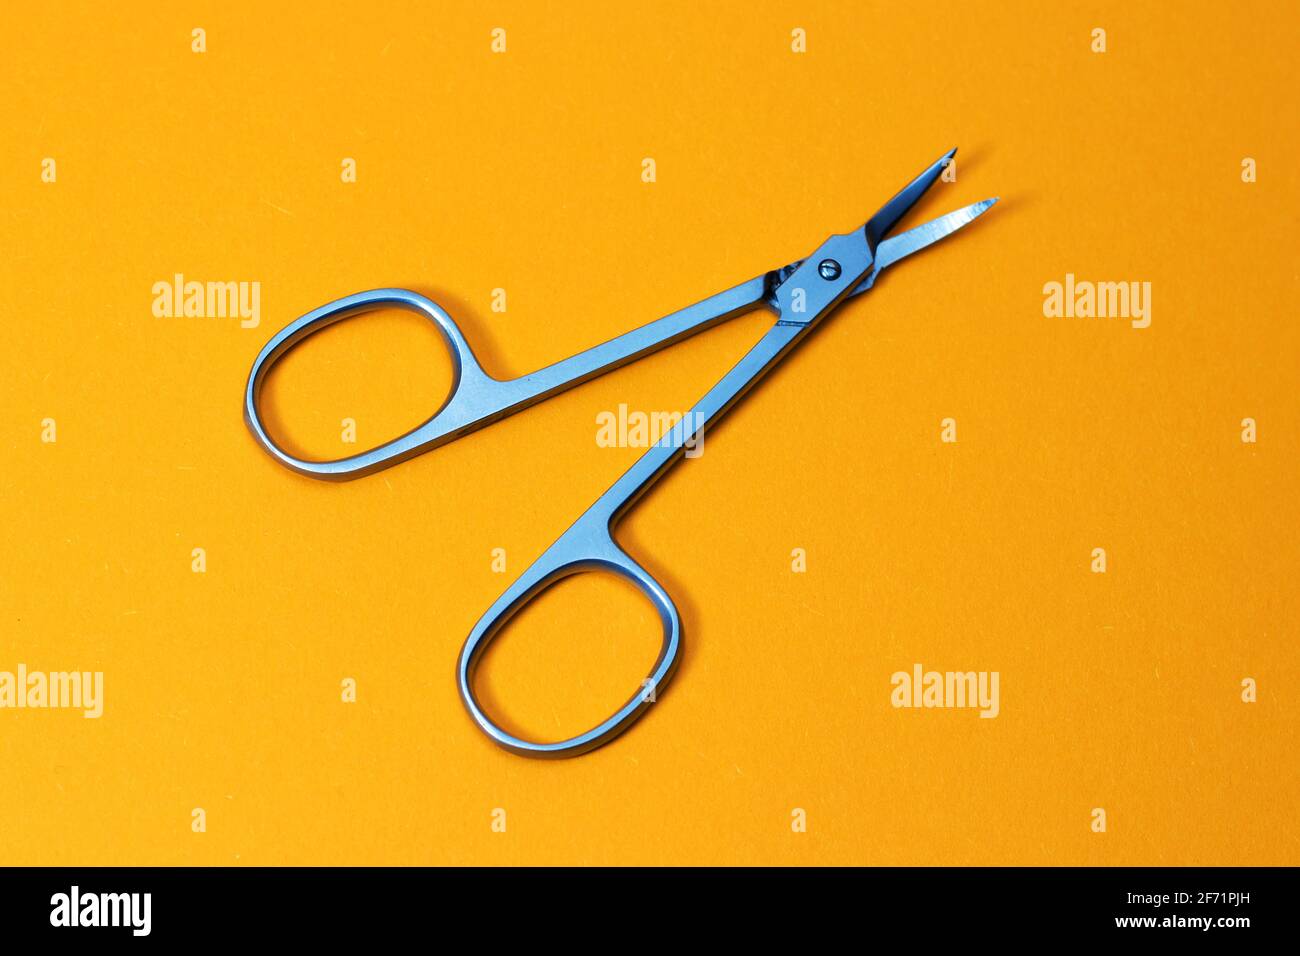 Small metal manicure scissors on yellow background. Stock Photo